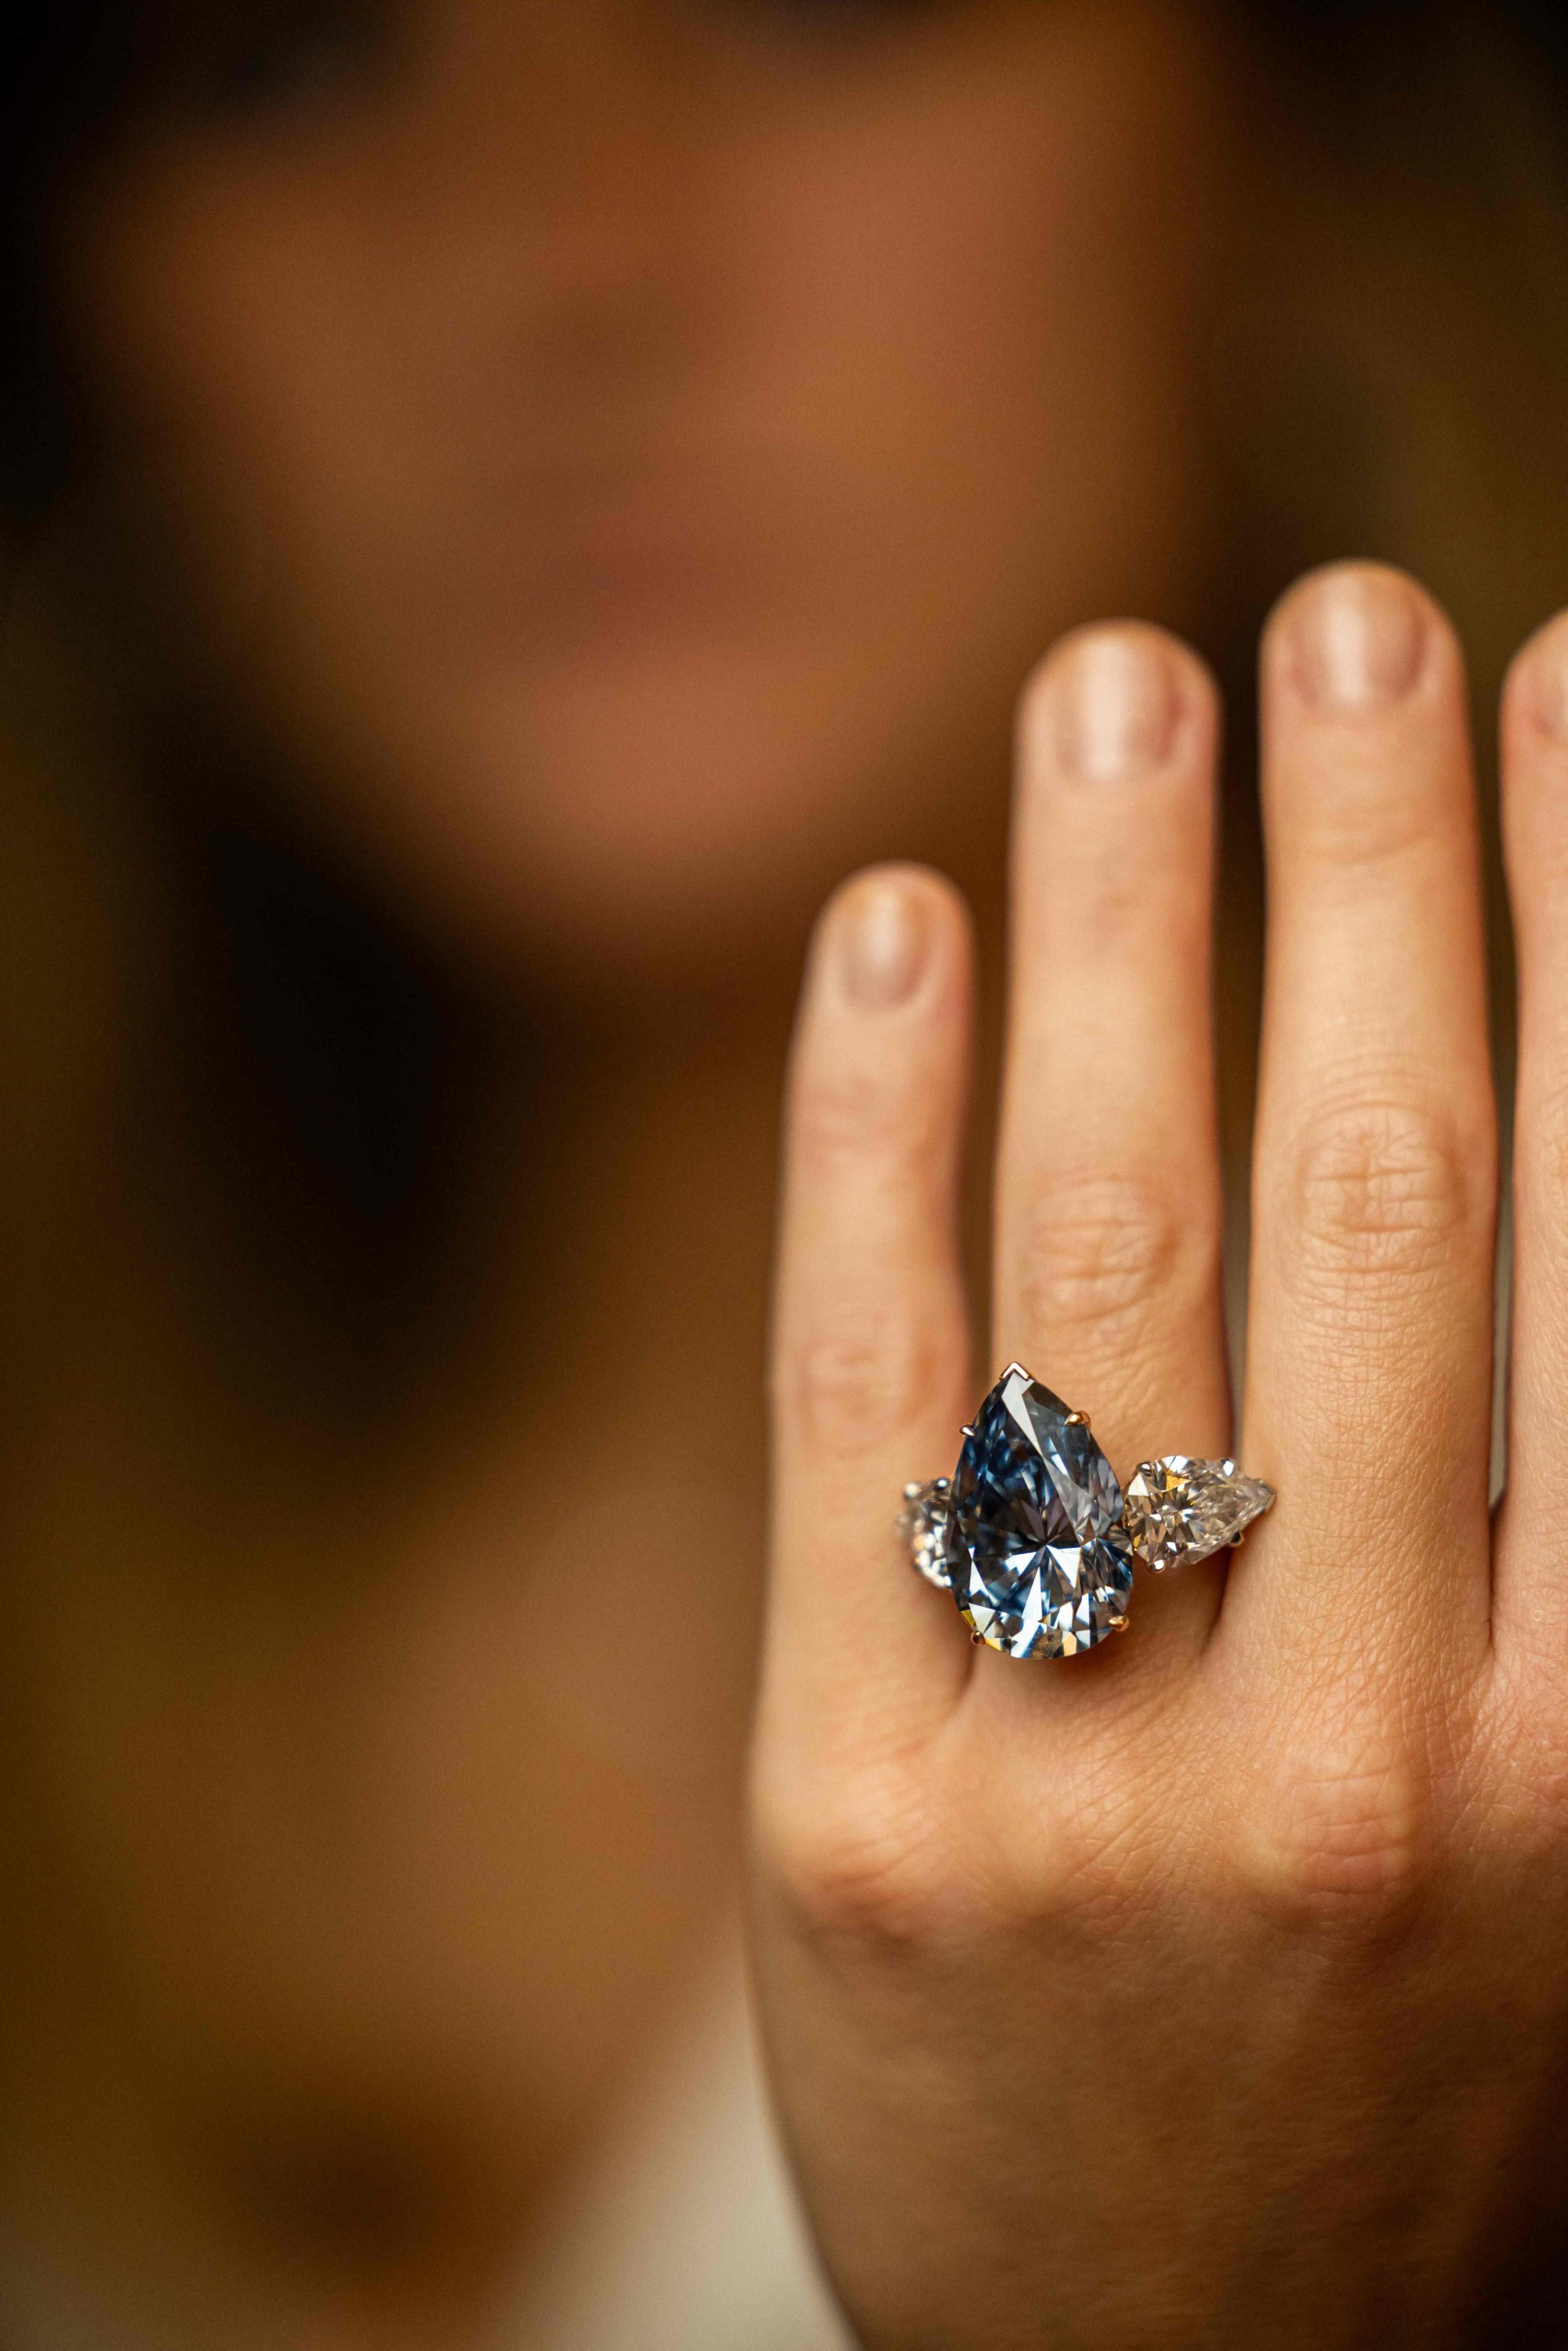 The Bleu Royal, one of the most expensive diamonds ever sold? The rare,  historic blue gem could fetch millions at Christie's auction, which also  features pieces worn by Audrey Hepburn and Marlon